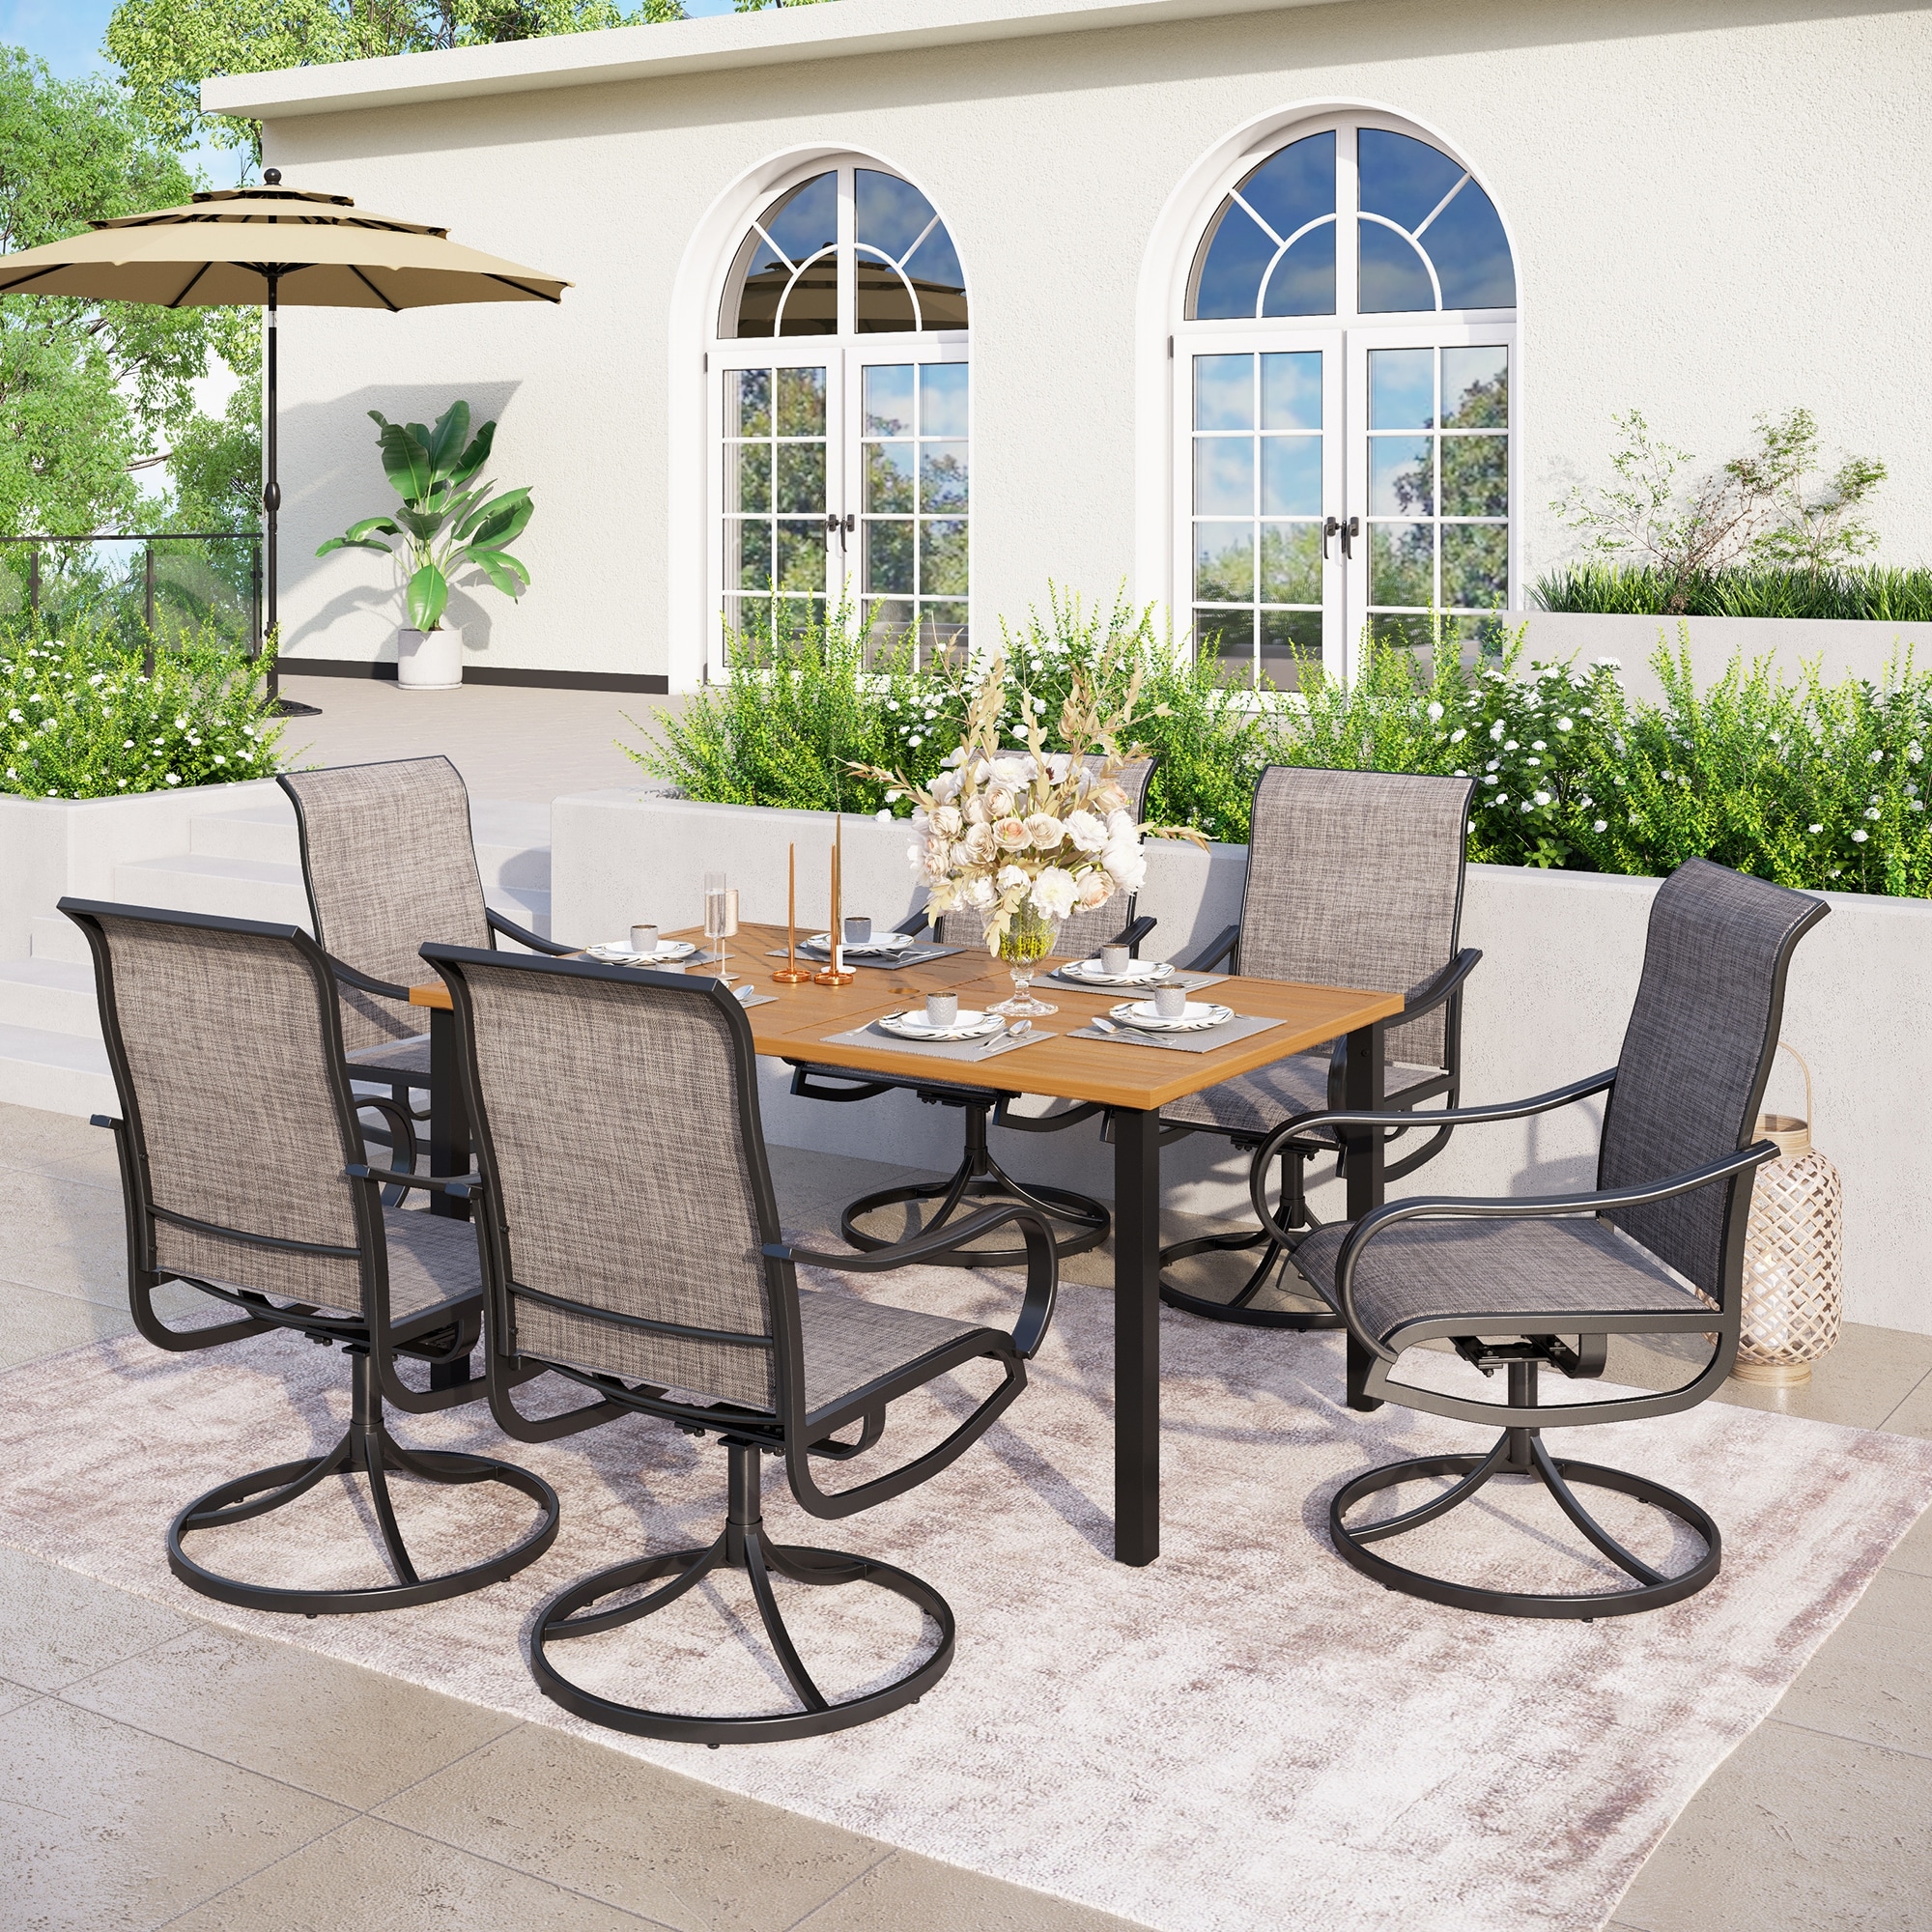 7-piece Patio Dining Set  6 Sling Patio Swivel Dining Chairs And 1 Metal Dining Table